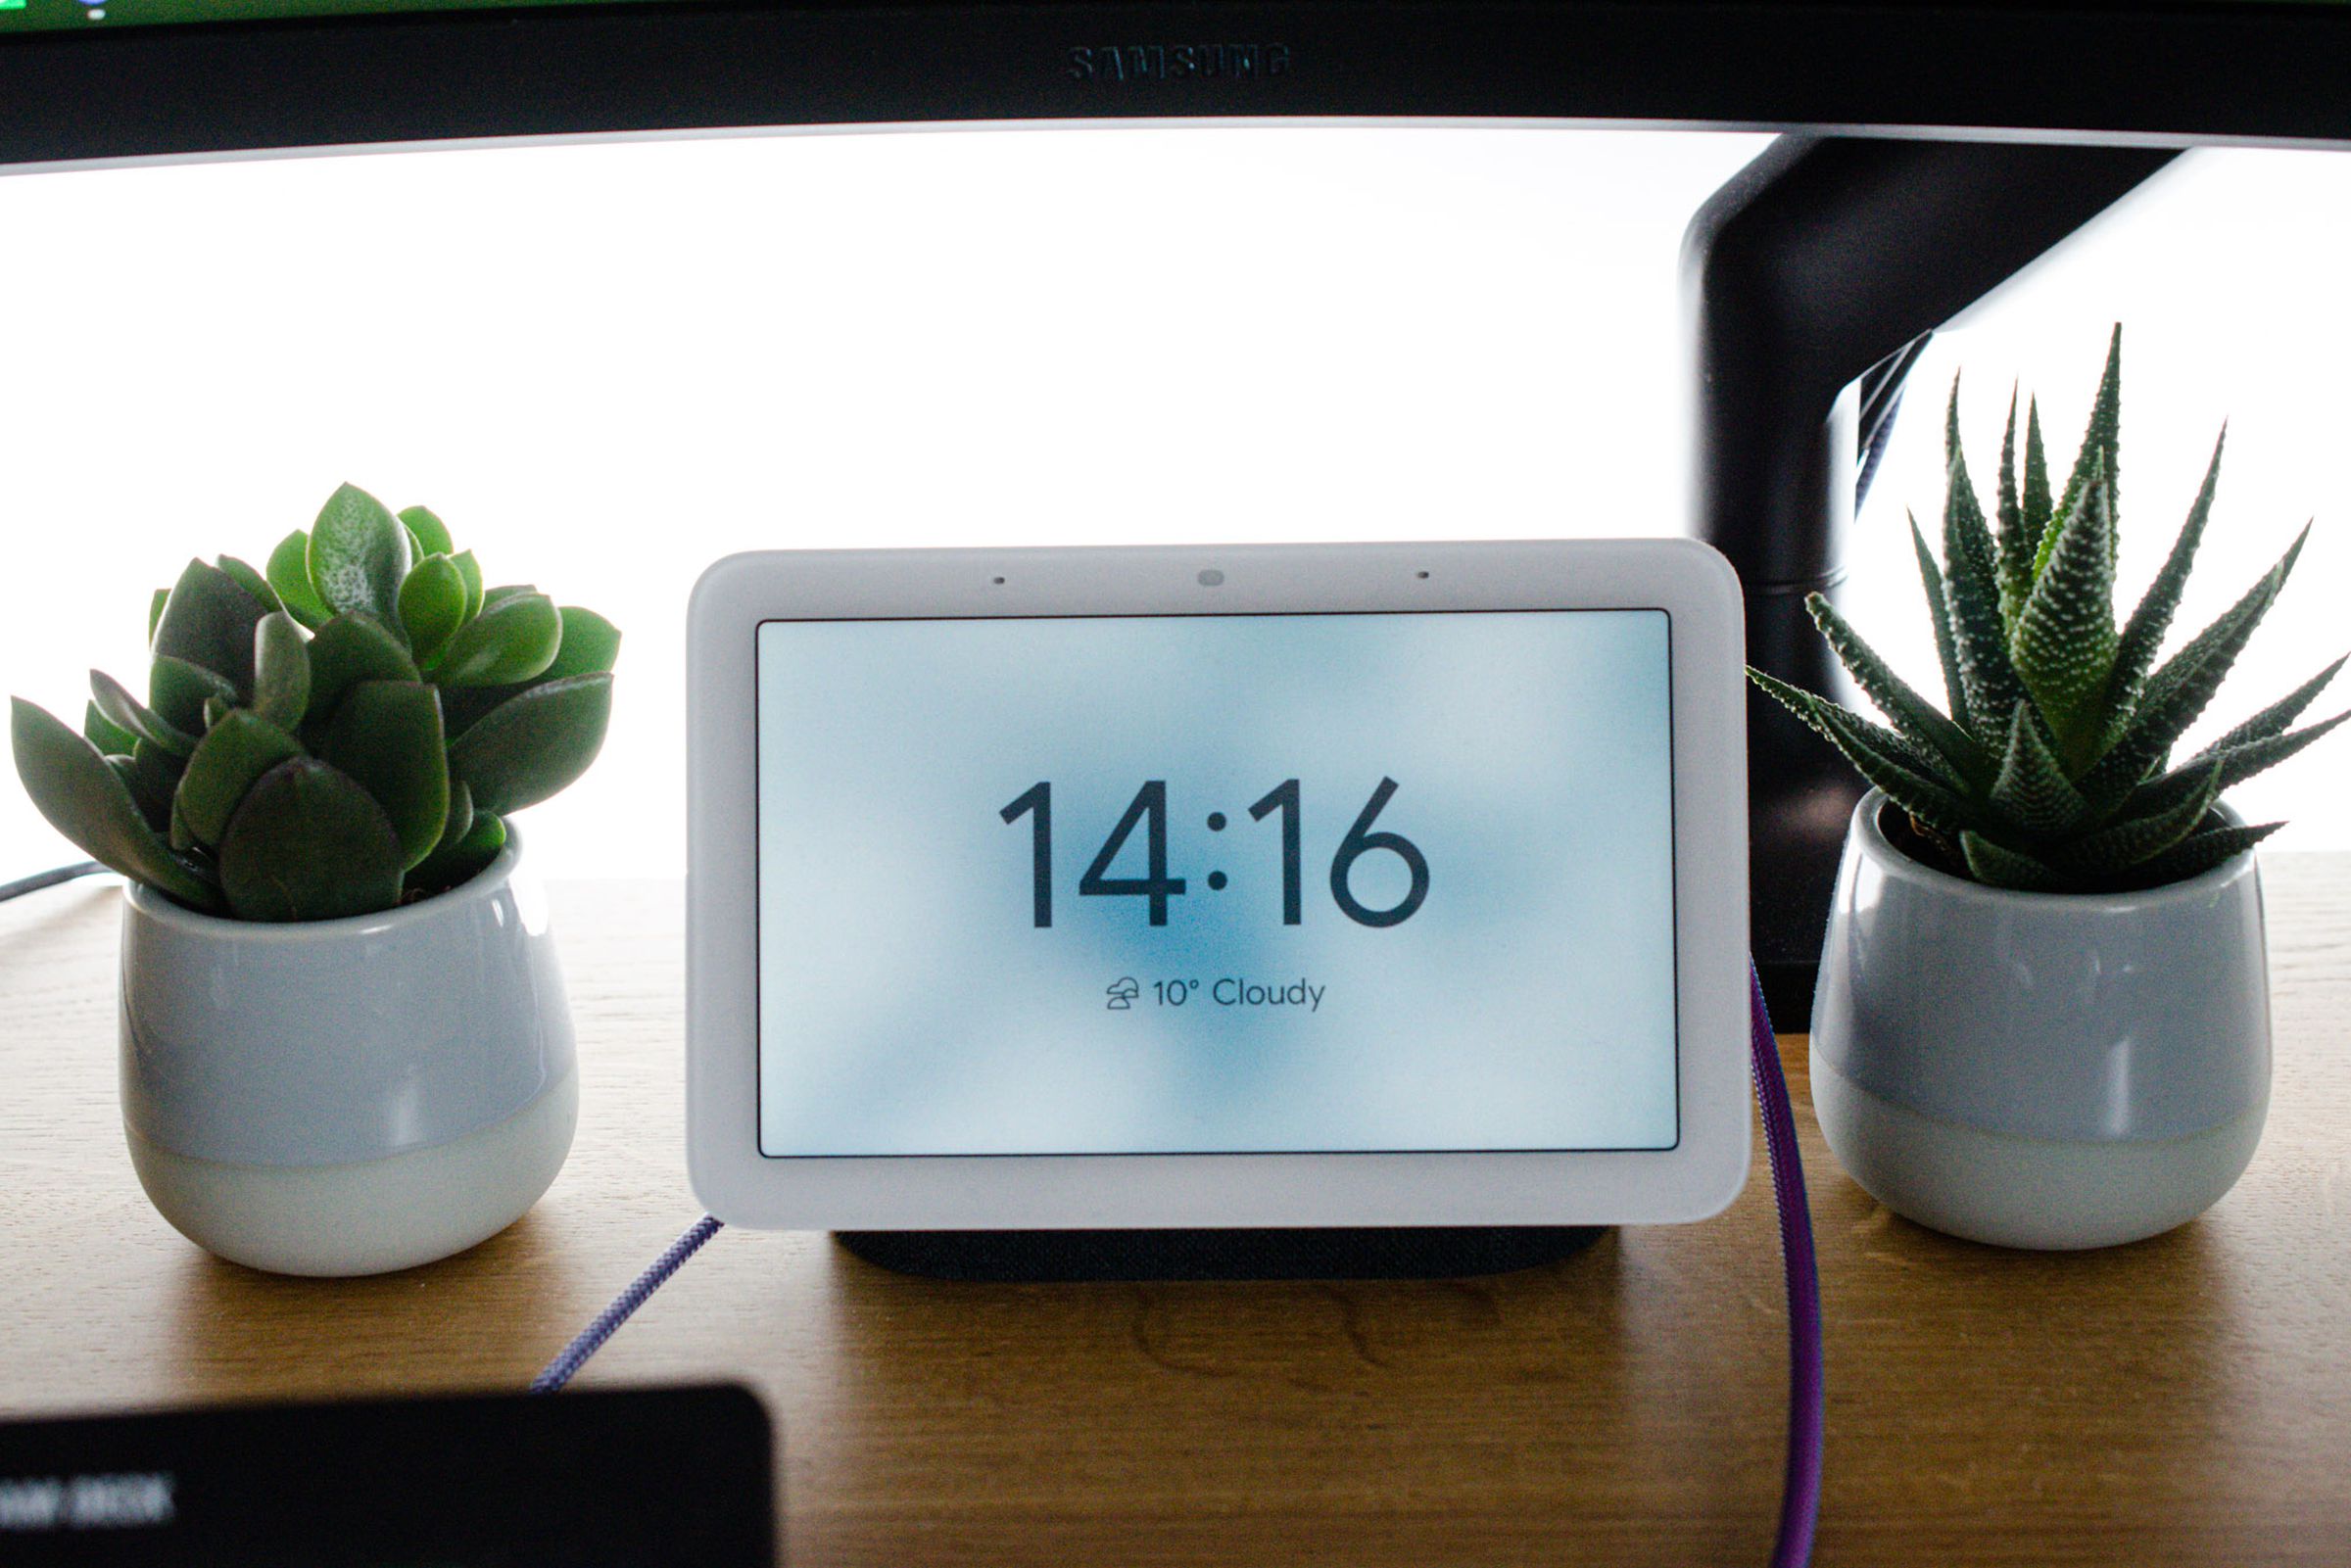 A Google Nest hub showing the time, with two small plants on either side.